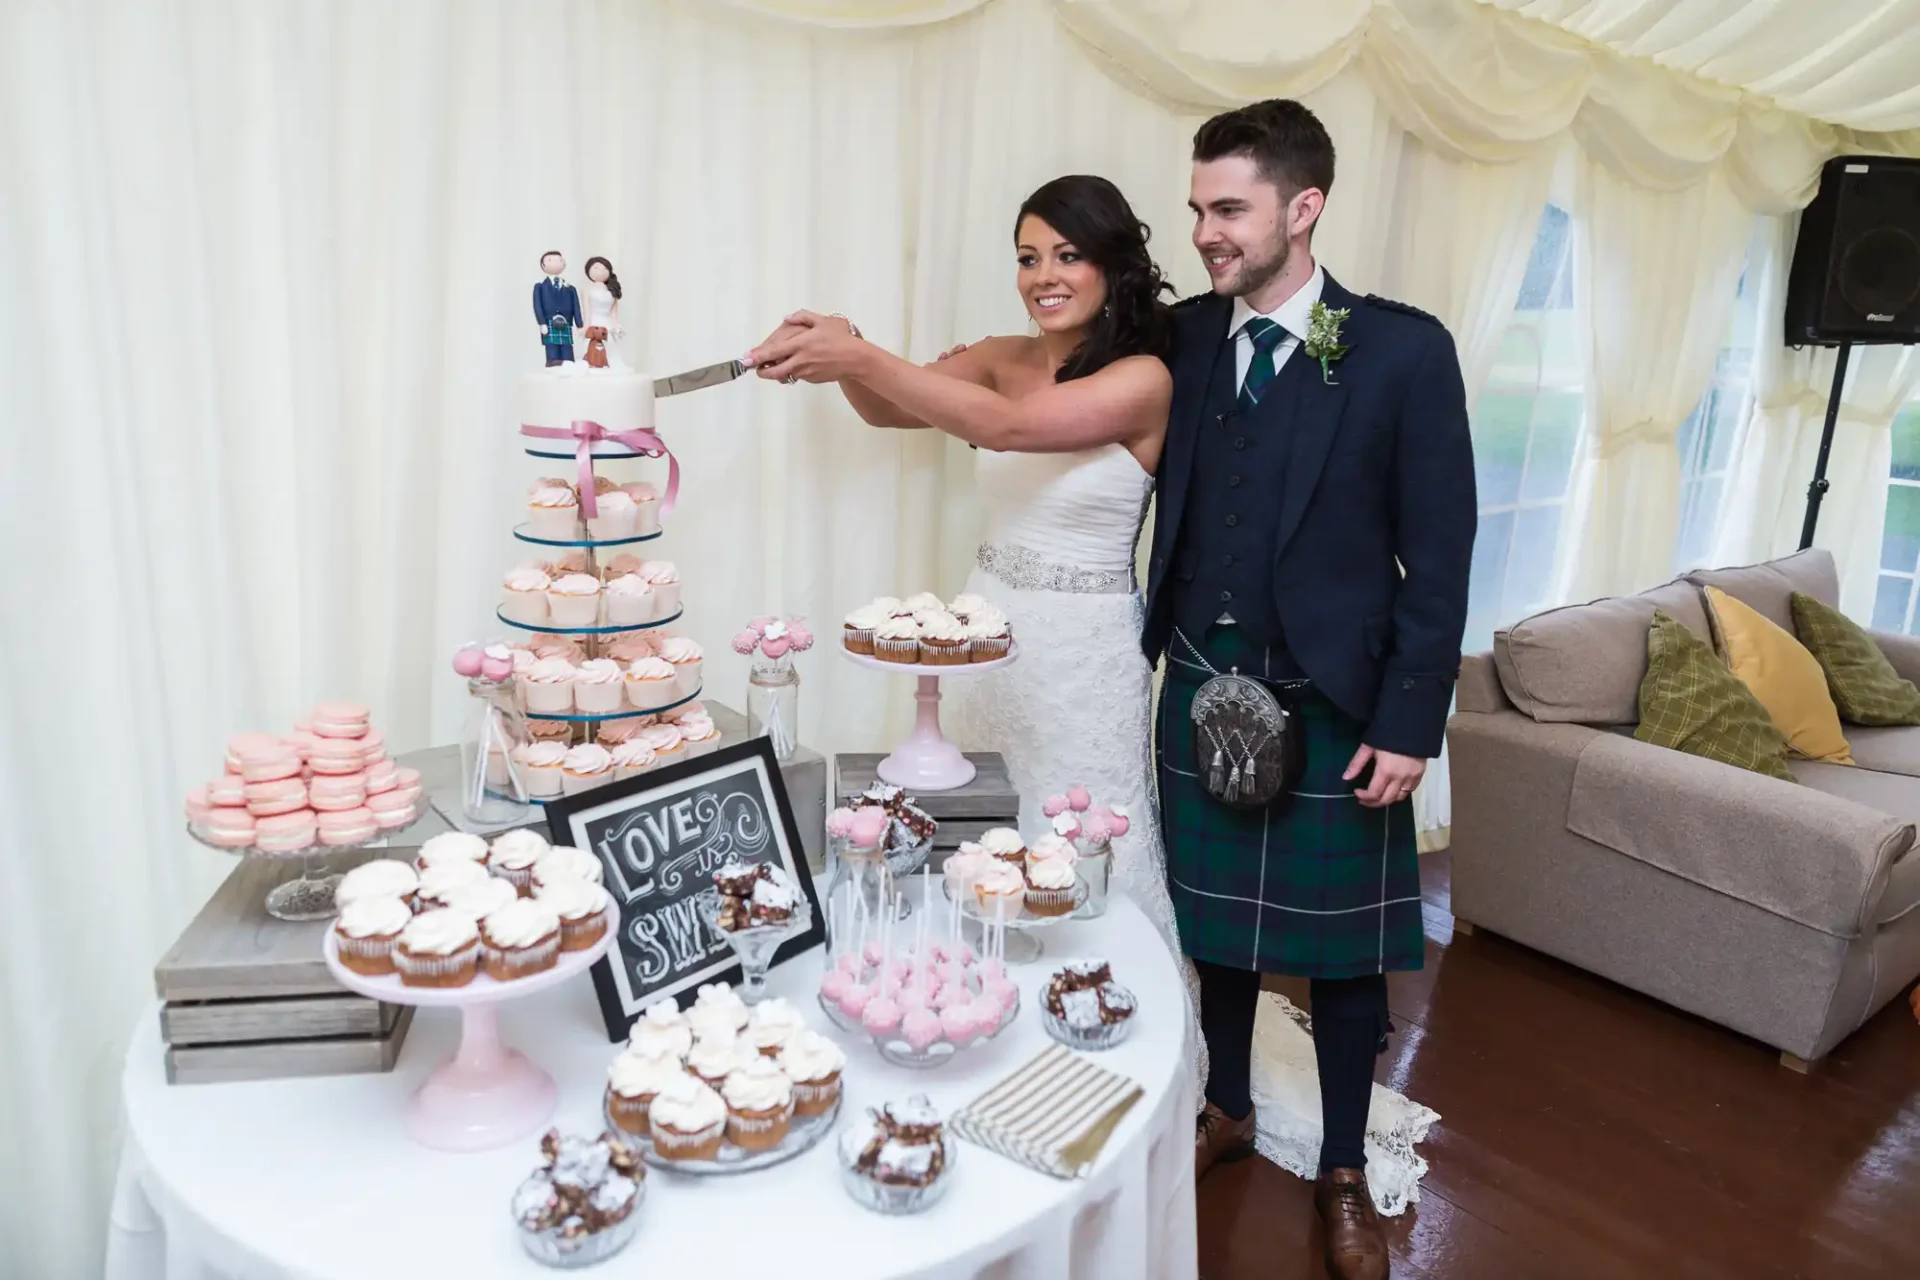 A bride and groom in wedding attire cutting a cake at a dessert table filled with cupcakes and sweets.